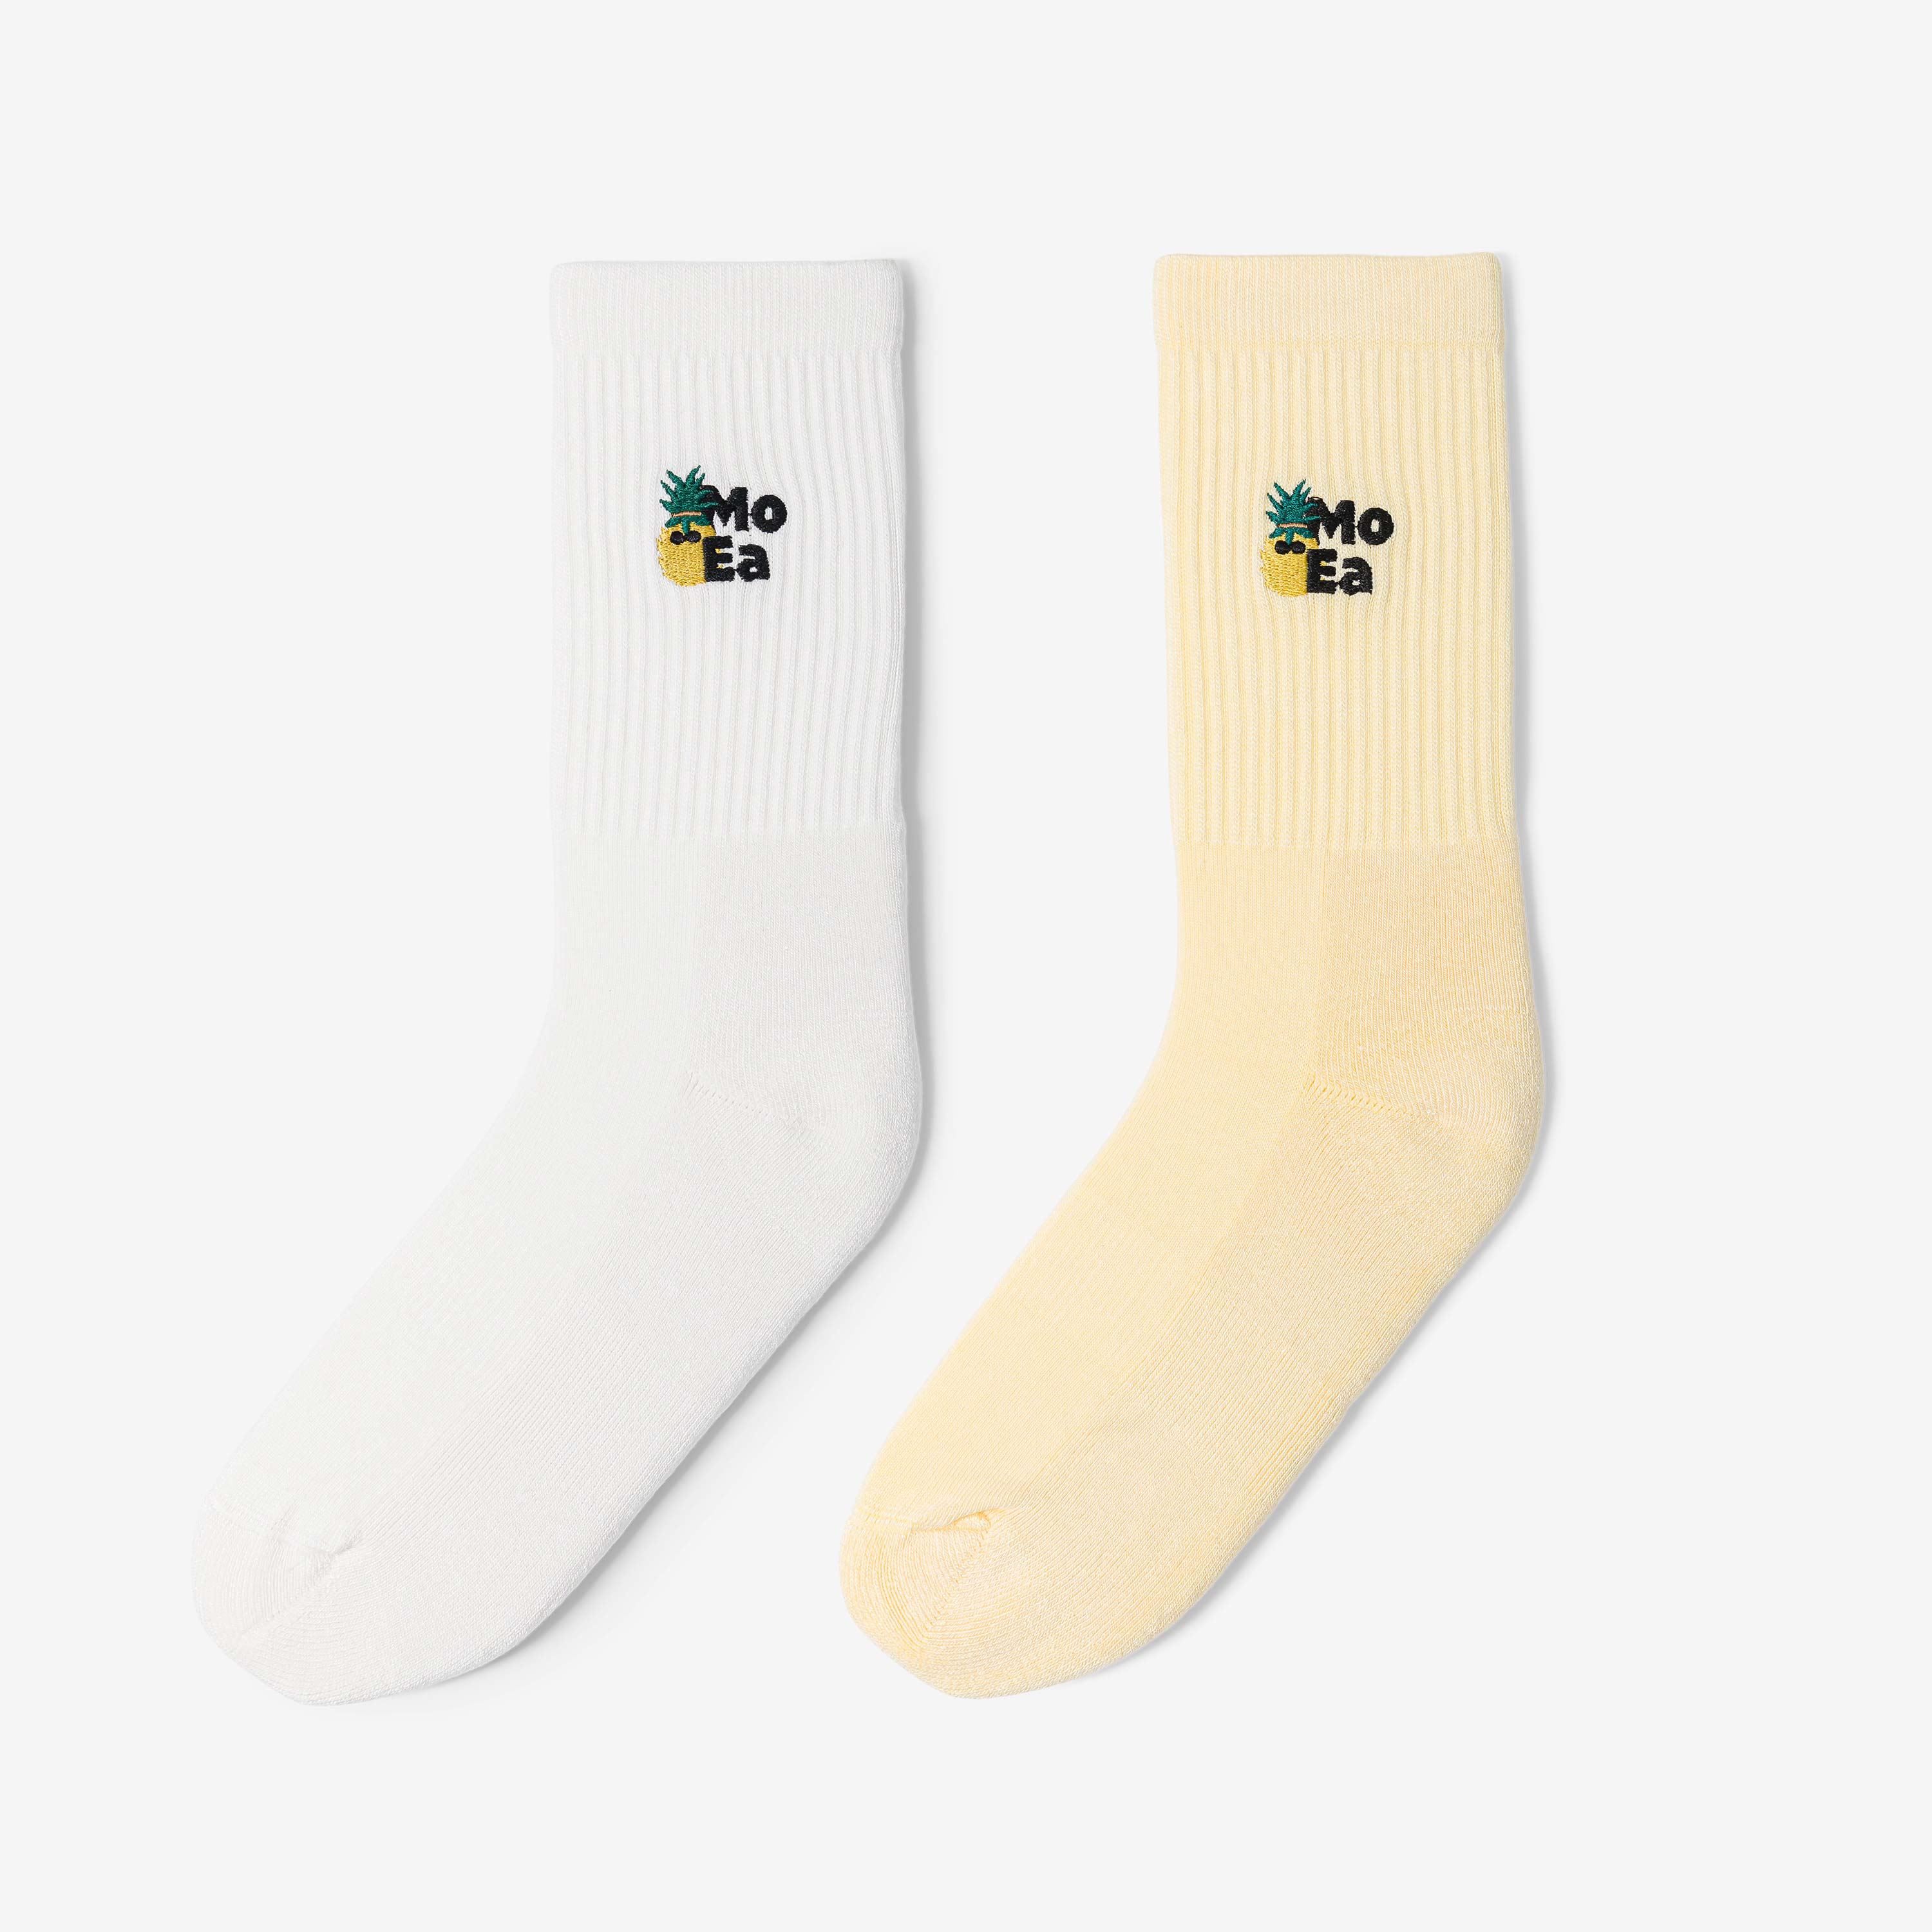 Chaussettes en bambou x2 - Pack ananas